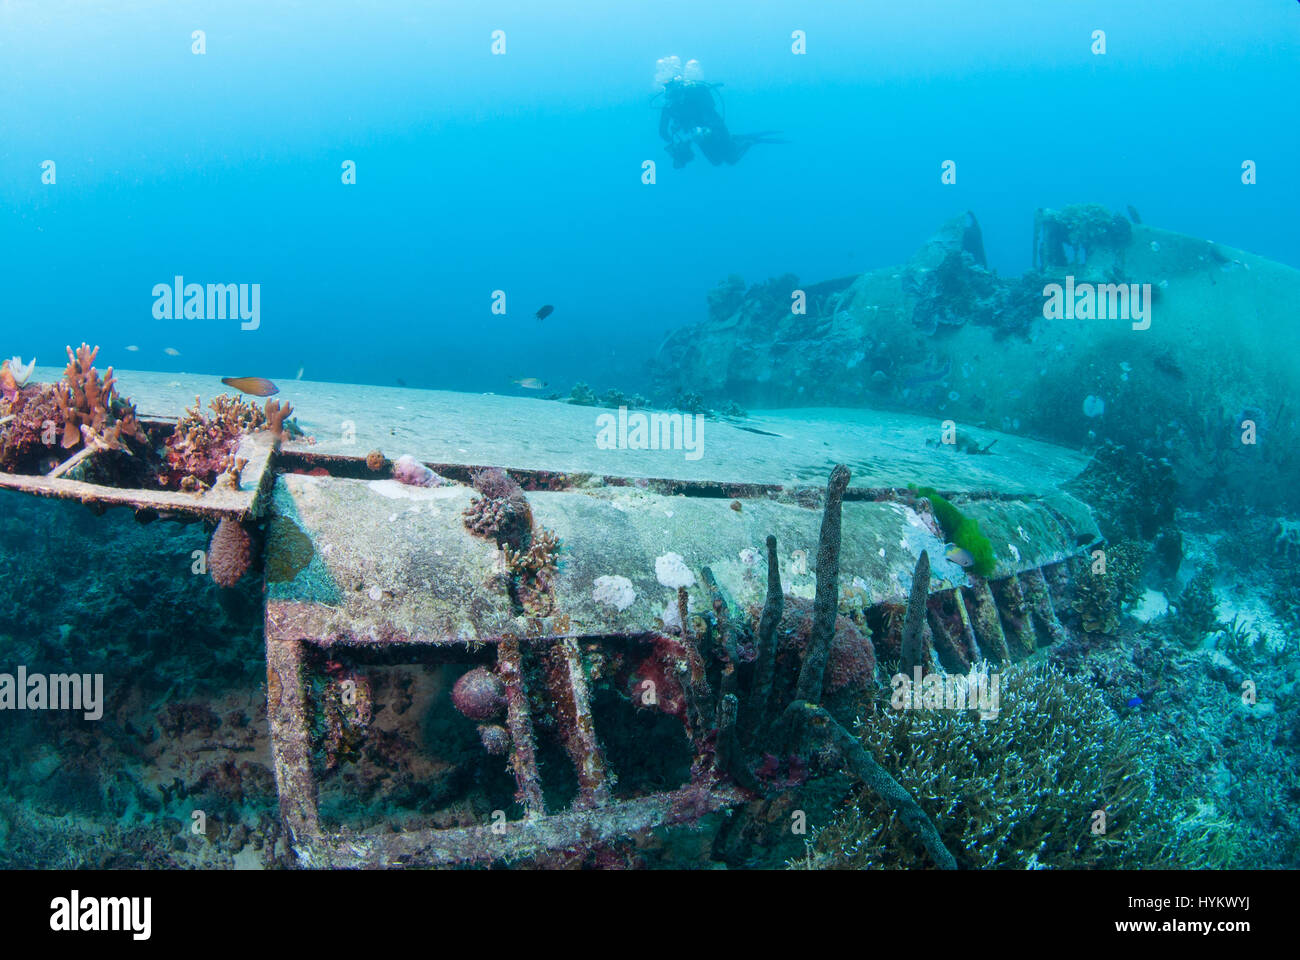 SOLOMON ISLANDS, PACIFIC OCEAN: A picture of a Grumman F6F 3 Hellcat carrier based fighter aircraft. THE REMNANTS of a fierce world war two battle have been captured at one hundred and eight five feet underwater. Pictures show these once powerful war machines, now lying dormant on the sea-bed.  A Japanese Mitsubishi A6M Zero long ranger fighter aircraft, an America Grumman F6F 3 Hellcat and a Boeing B-17 Flying Fortress are shown in various degrees of decay with colourful coral growing out from now their rusted shells, some of which included the human remains of the tragic crewmen (not picture Stock Photo